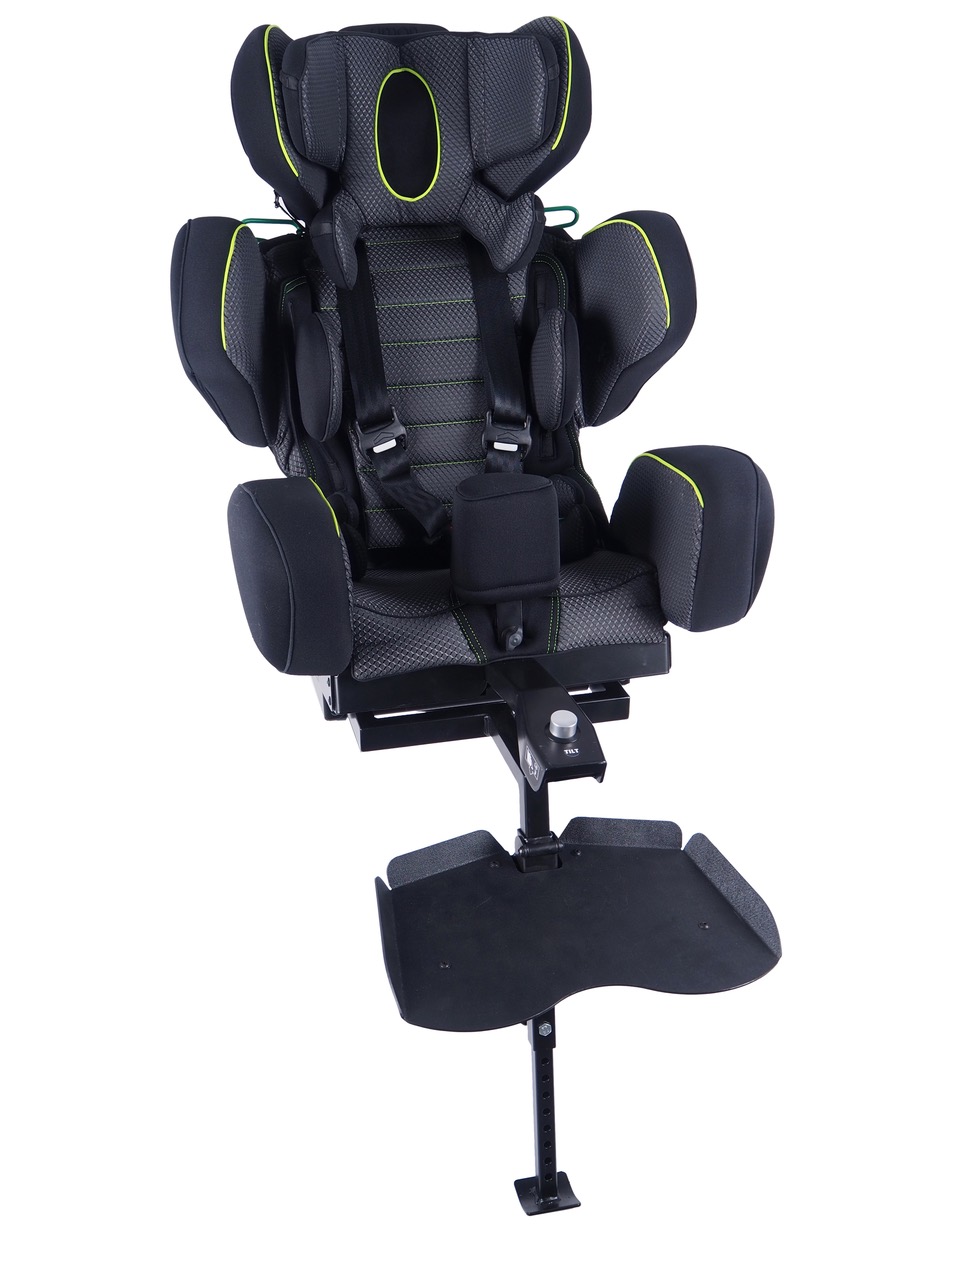 SIMON car seat in black with green trim with foot rest.